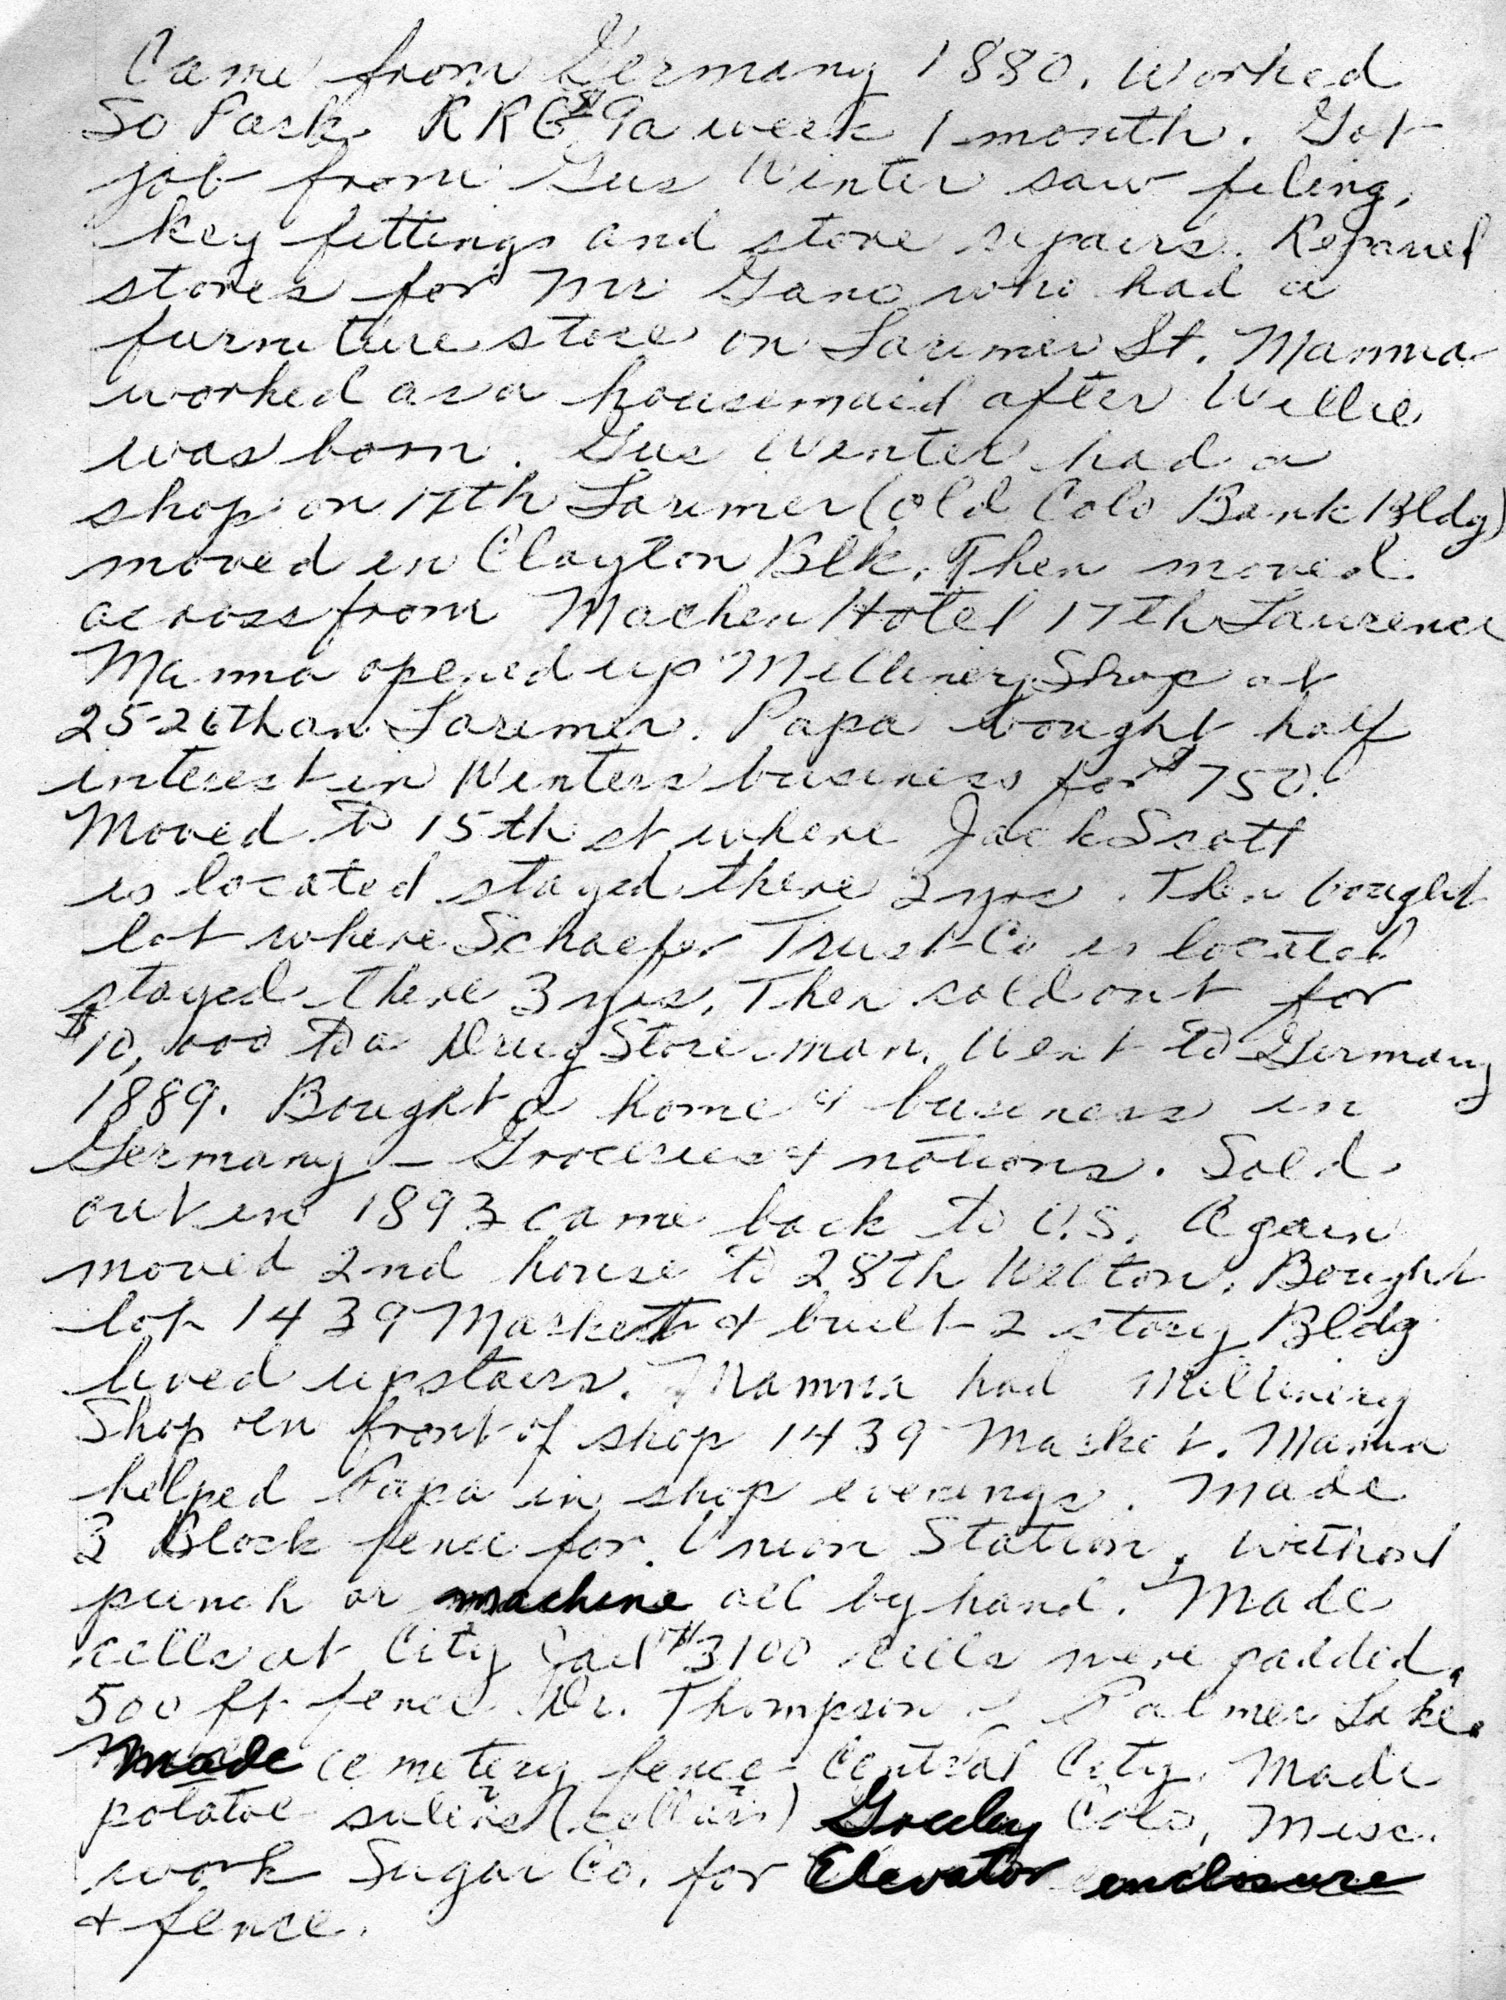 Dauth Family Archive - Elizabeth Fitting Family History Page 20